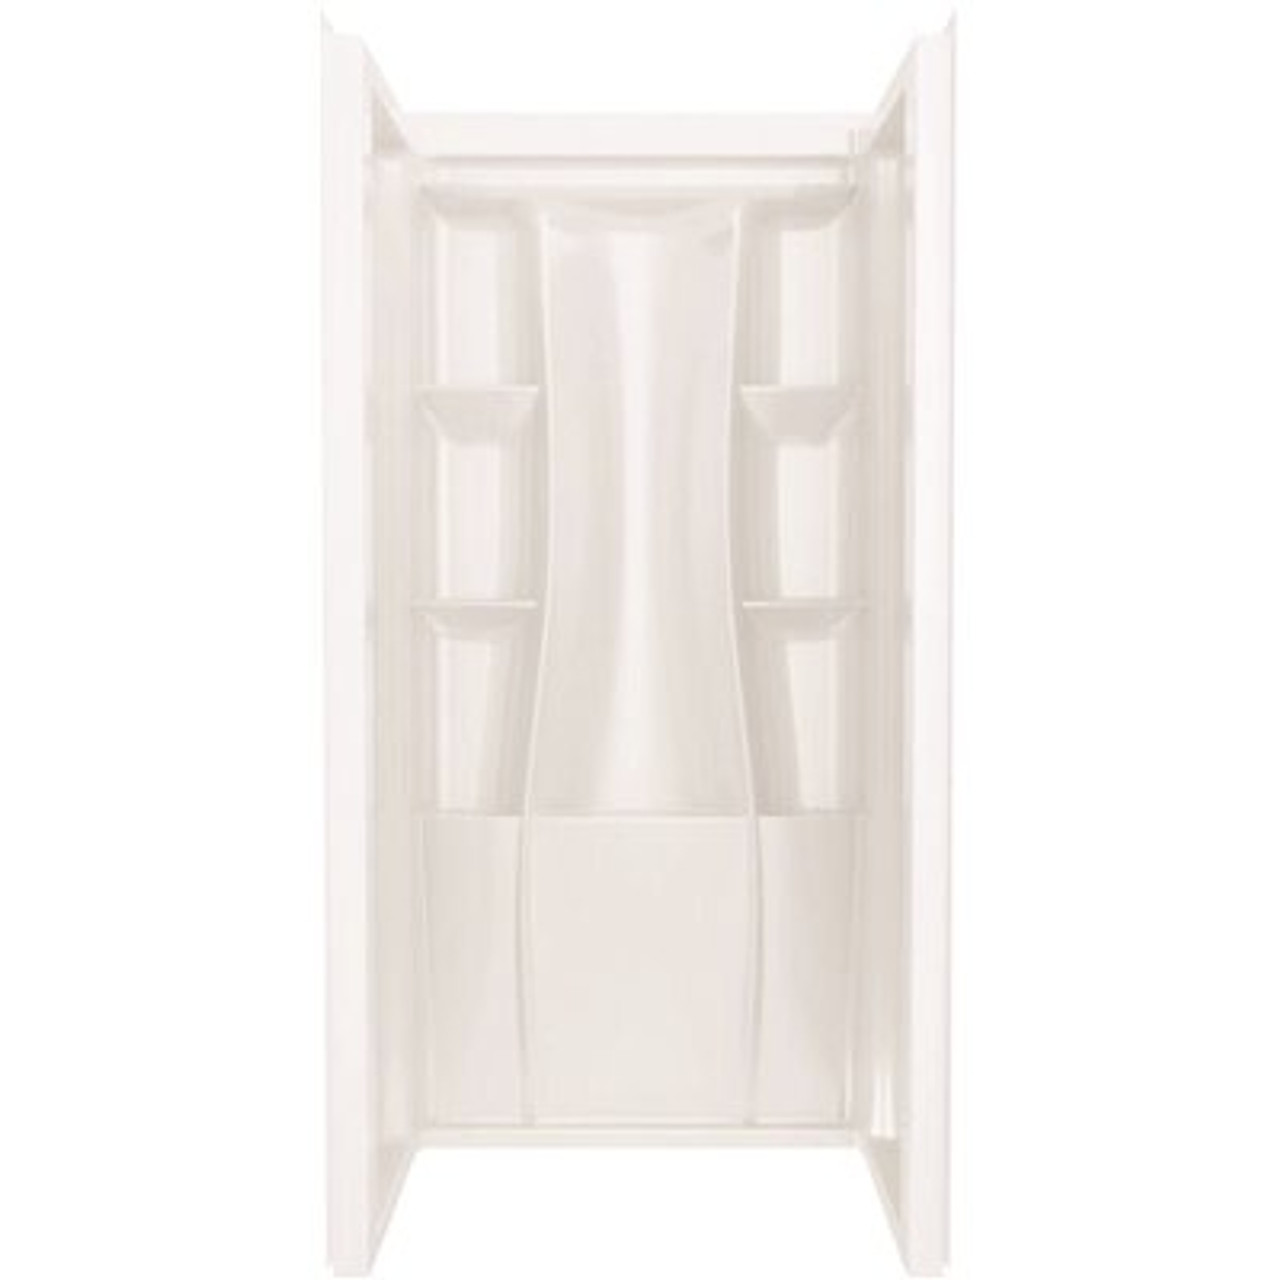 Delta Classic 500 36 in. W x 73.25 in. H x 36 in. D 3-Piece Direct-to-Stud Alcove Shower Surrounds in High Gloss White